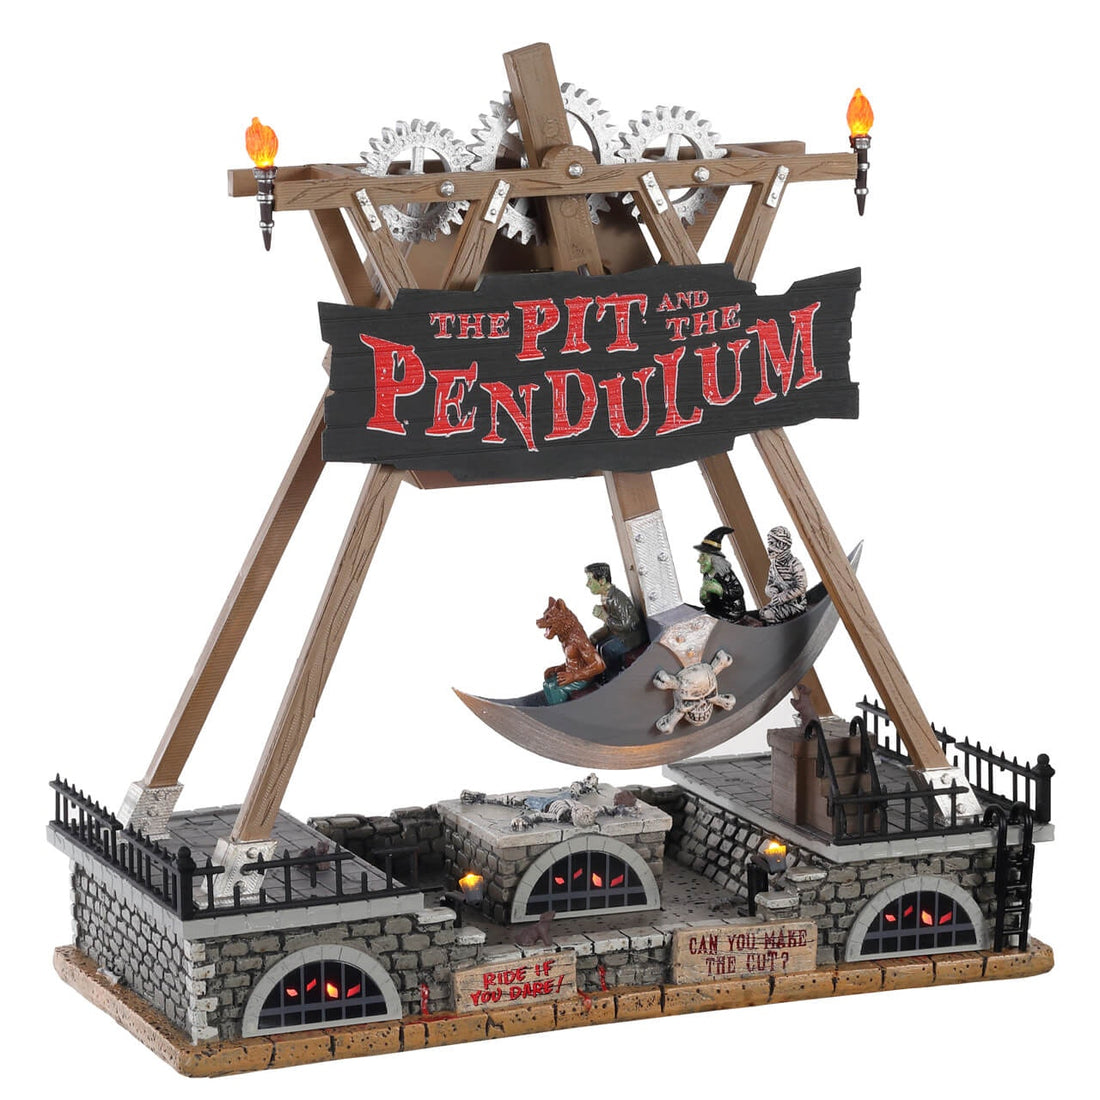 Lemax's The Pit and the Pendulum